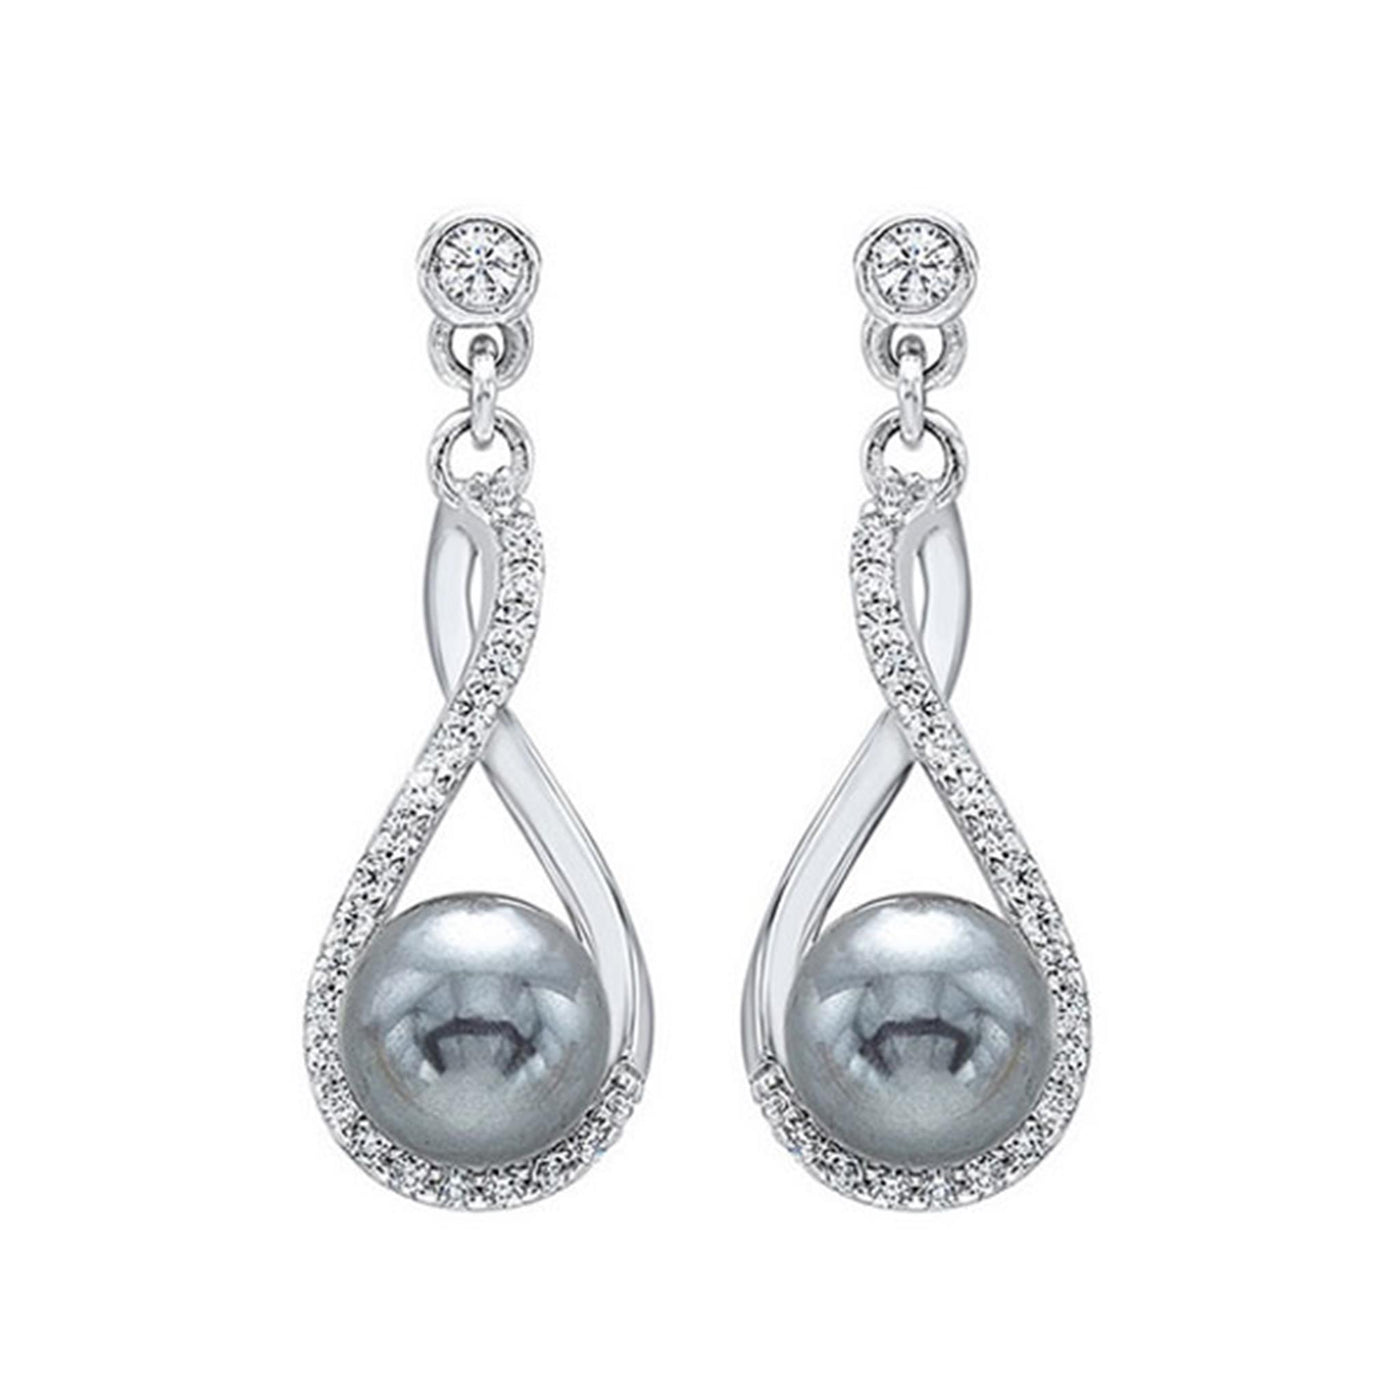 Sterling Silver Dangle Style Earrings Featuring Grey Simulated Shell Pearls